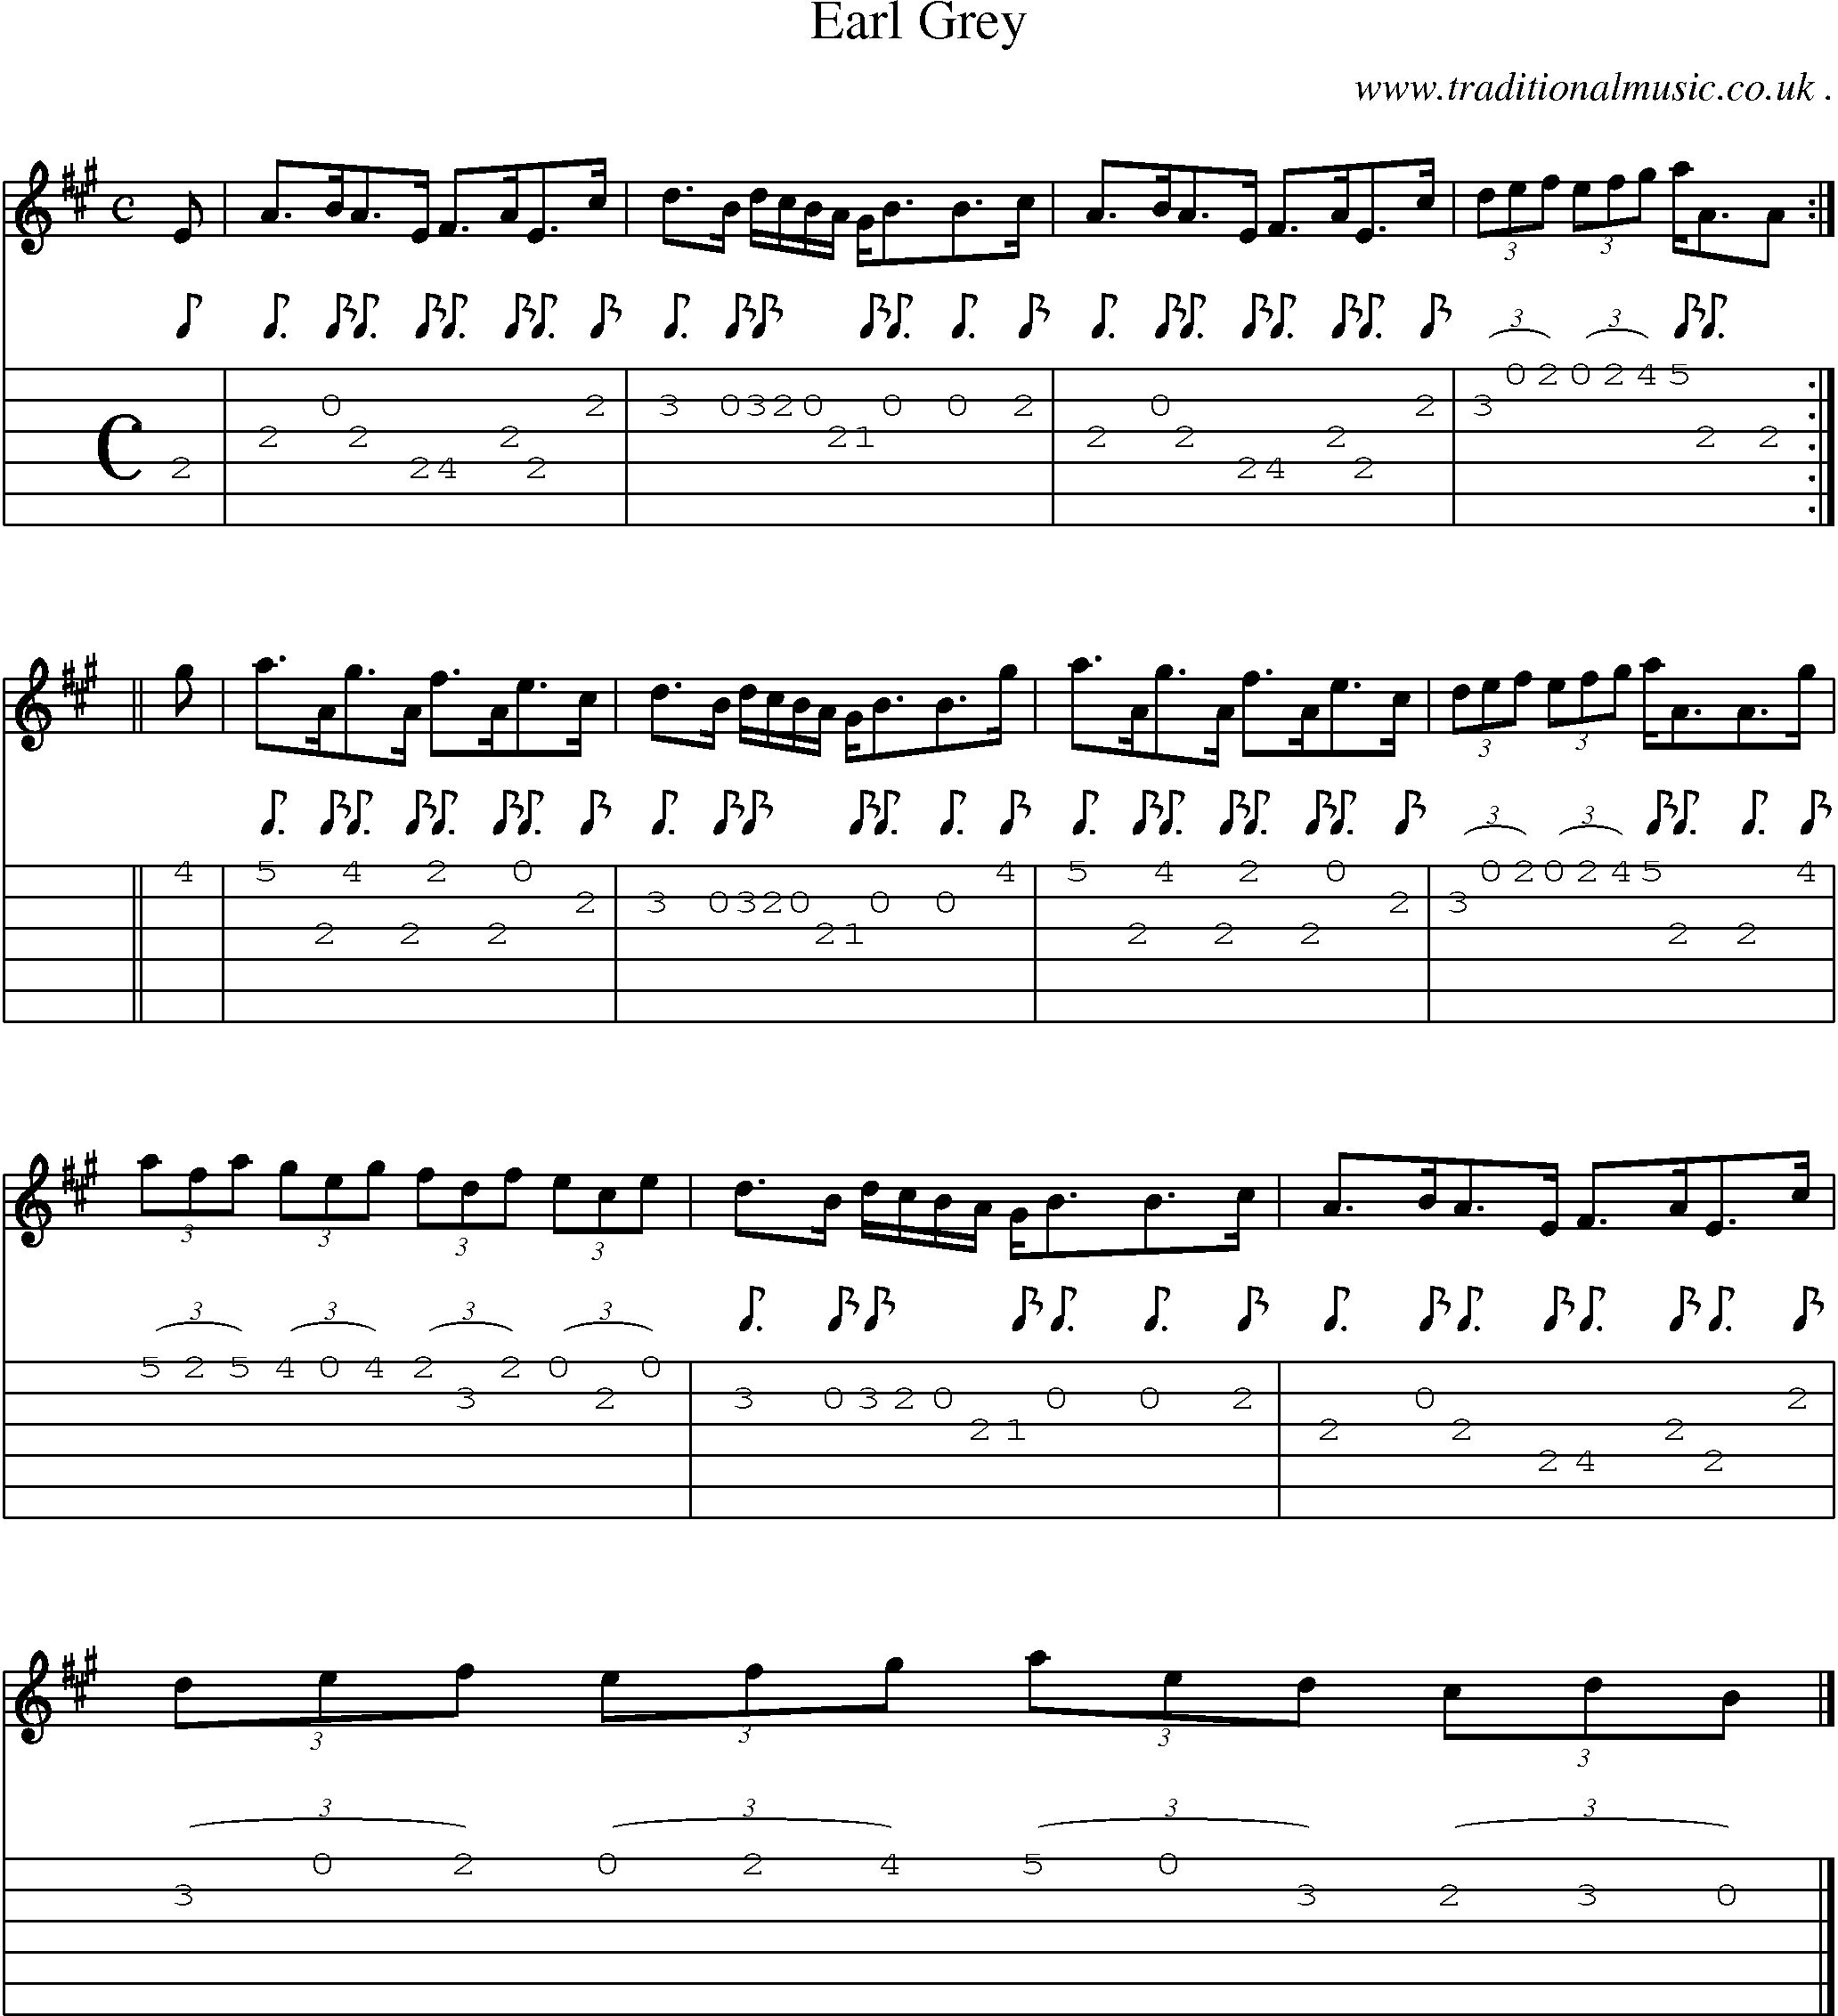 Sheet-music  score, Chords and Guitar Tabs for Earl Grey